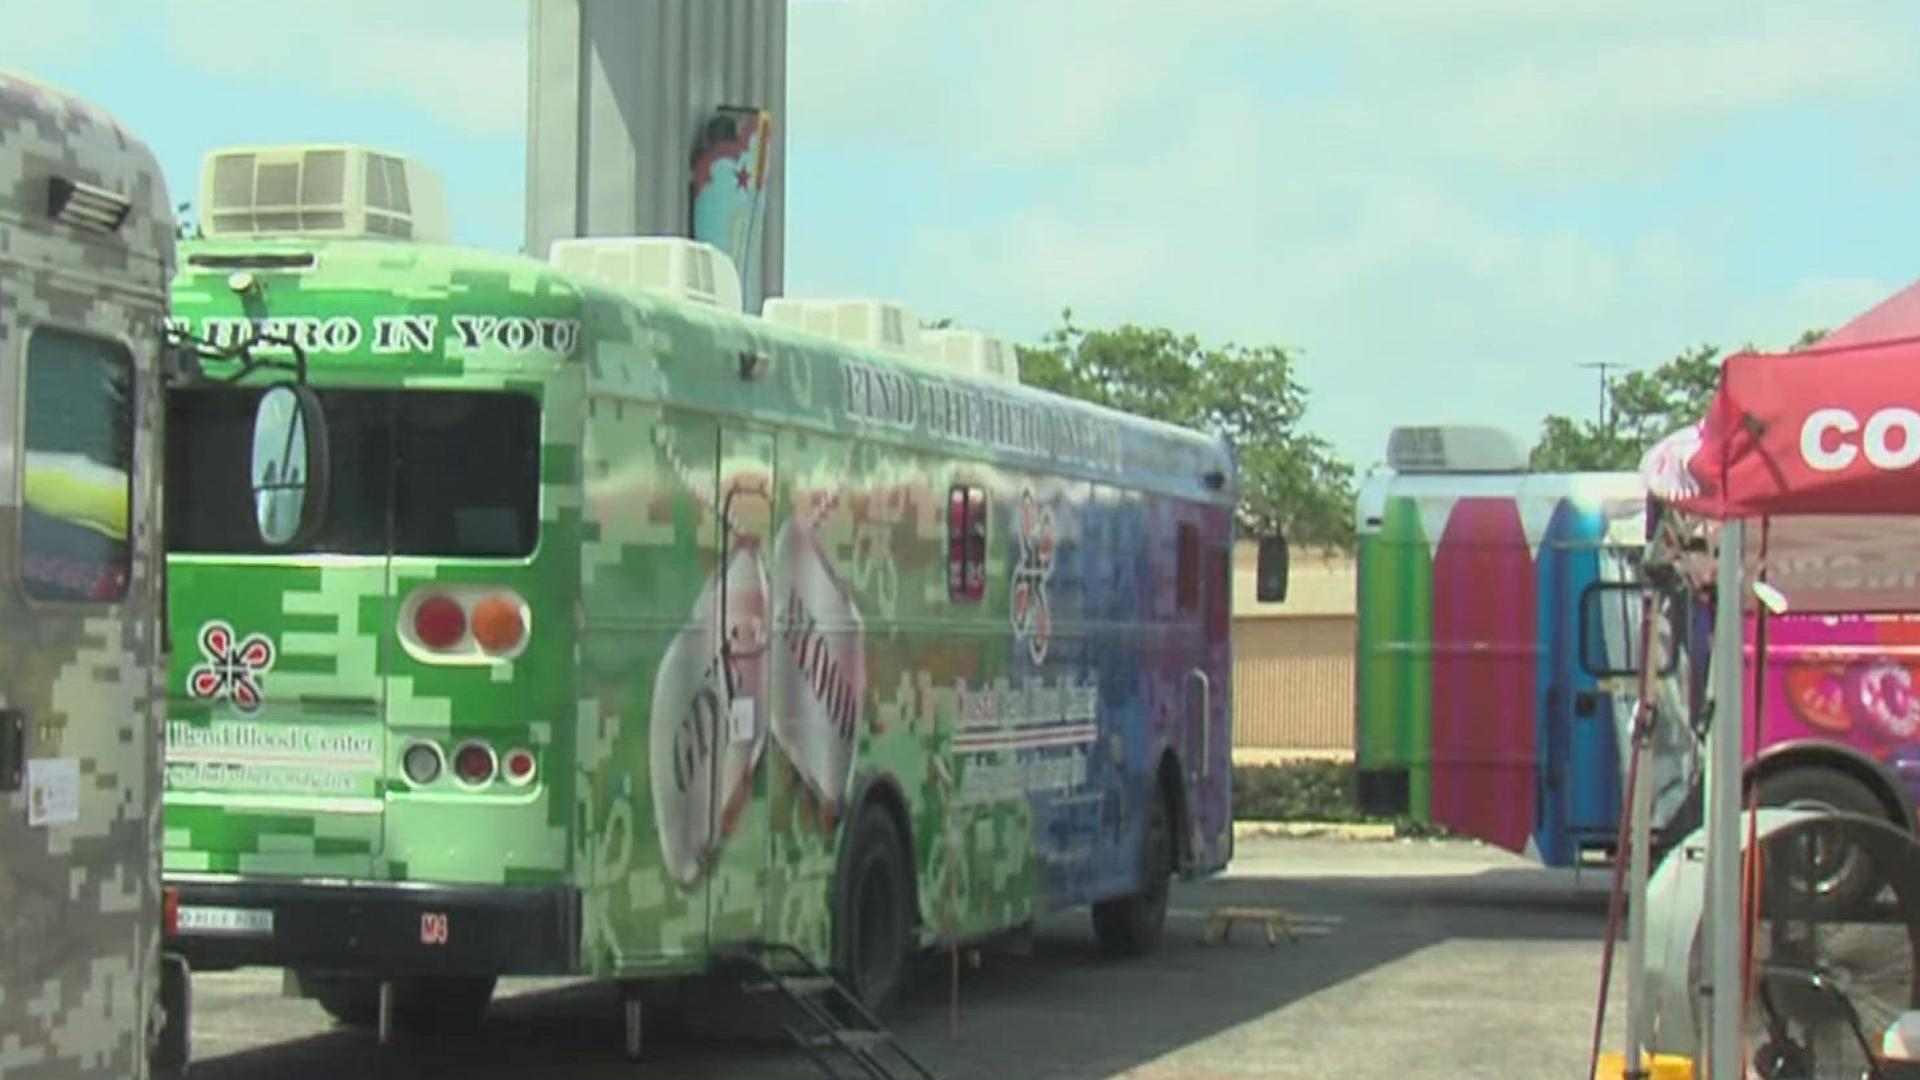 The annual 'Rock and Roll Up Your Sleeve' summer blood drive will be held from 9 a.m. to 5 p.m. Saturday at Cavender's Boot City.